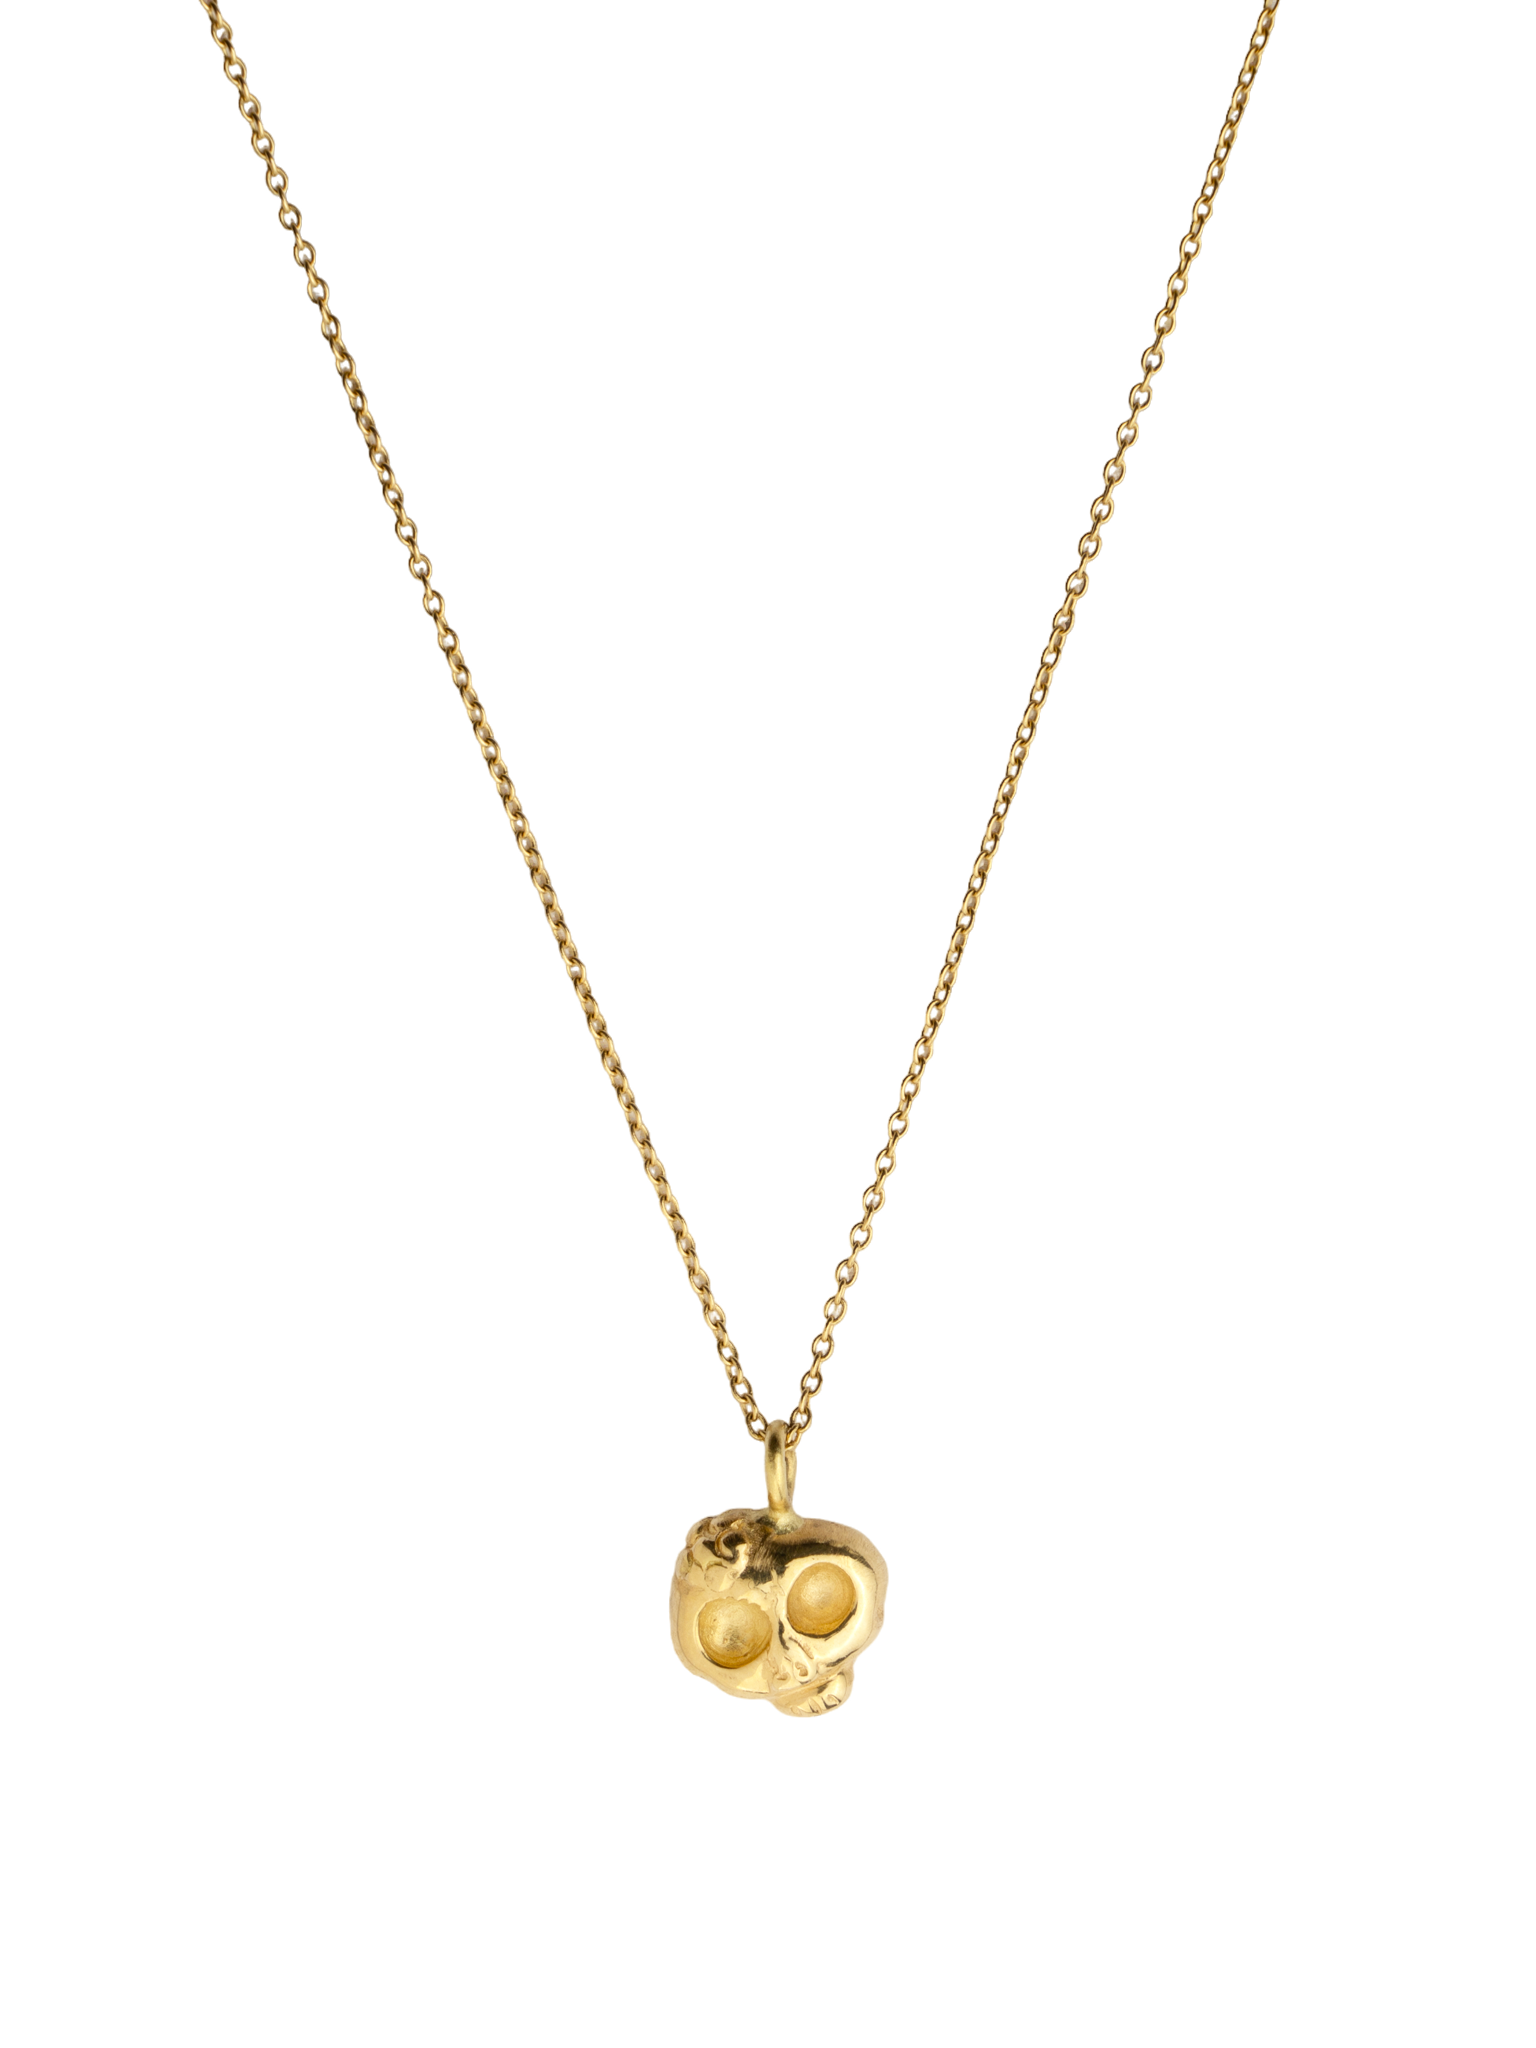 Scull necklace